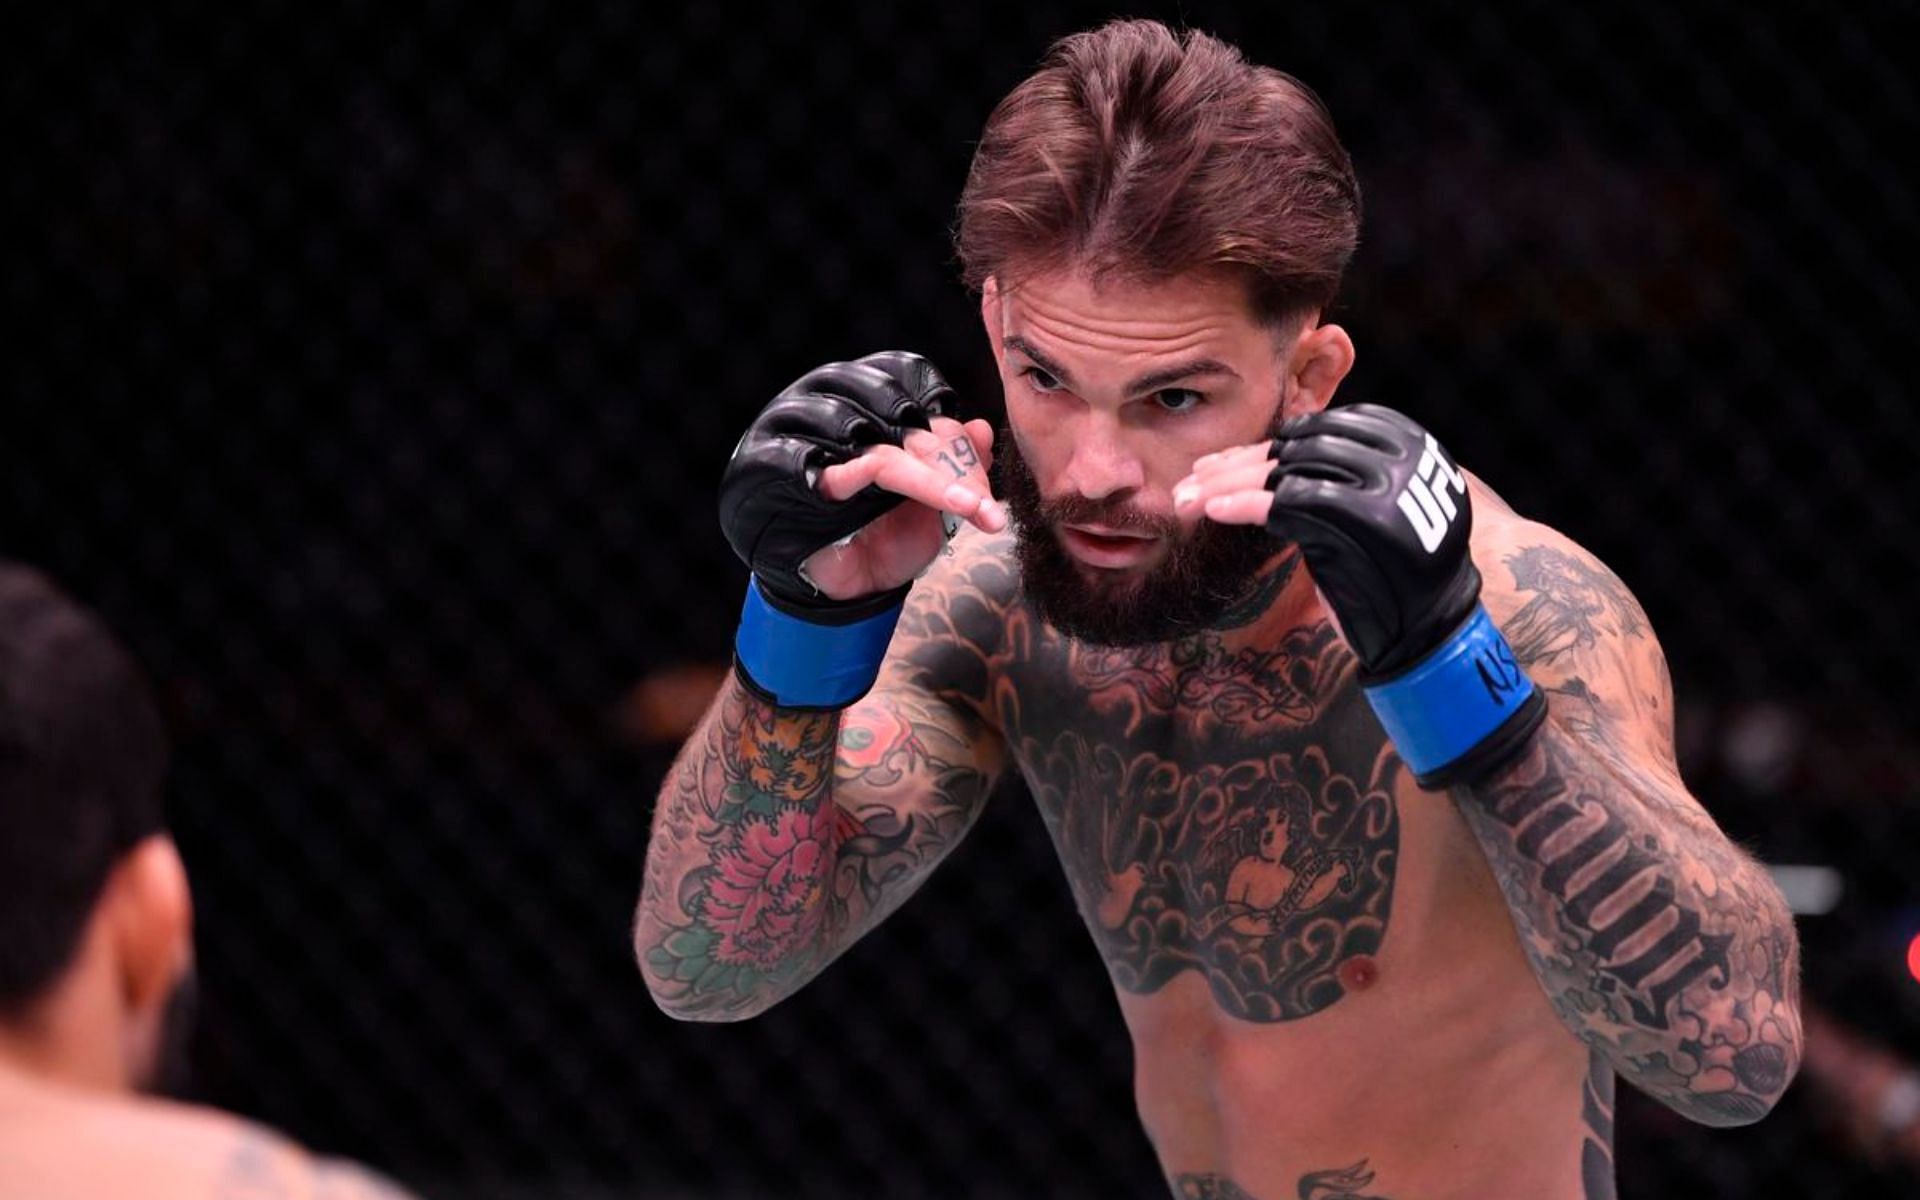 After his loss to Kai Kara-France, who should Cody Garbrandt face off with next?